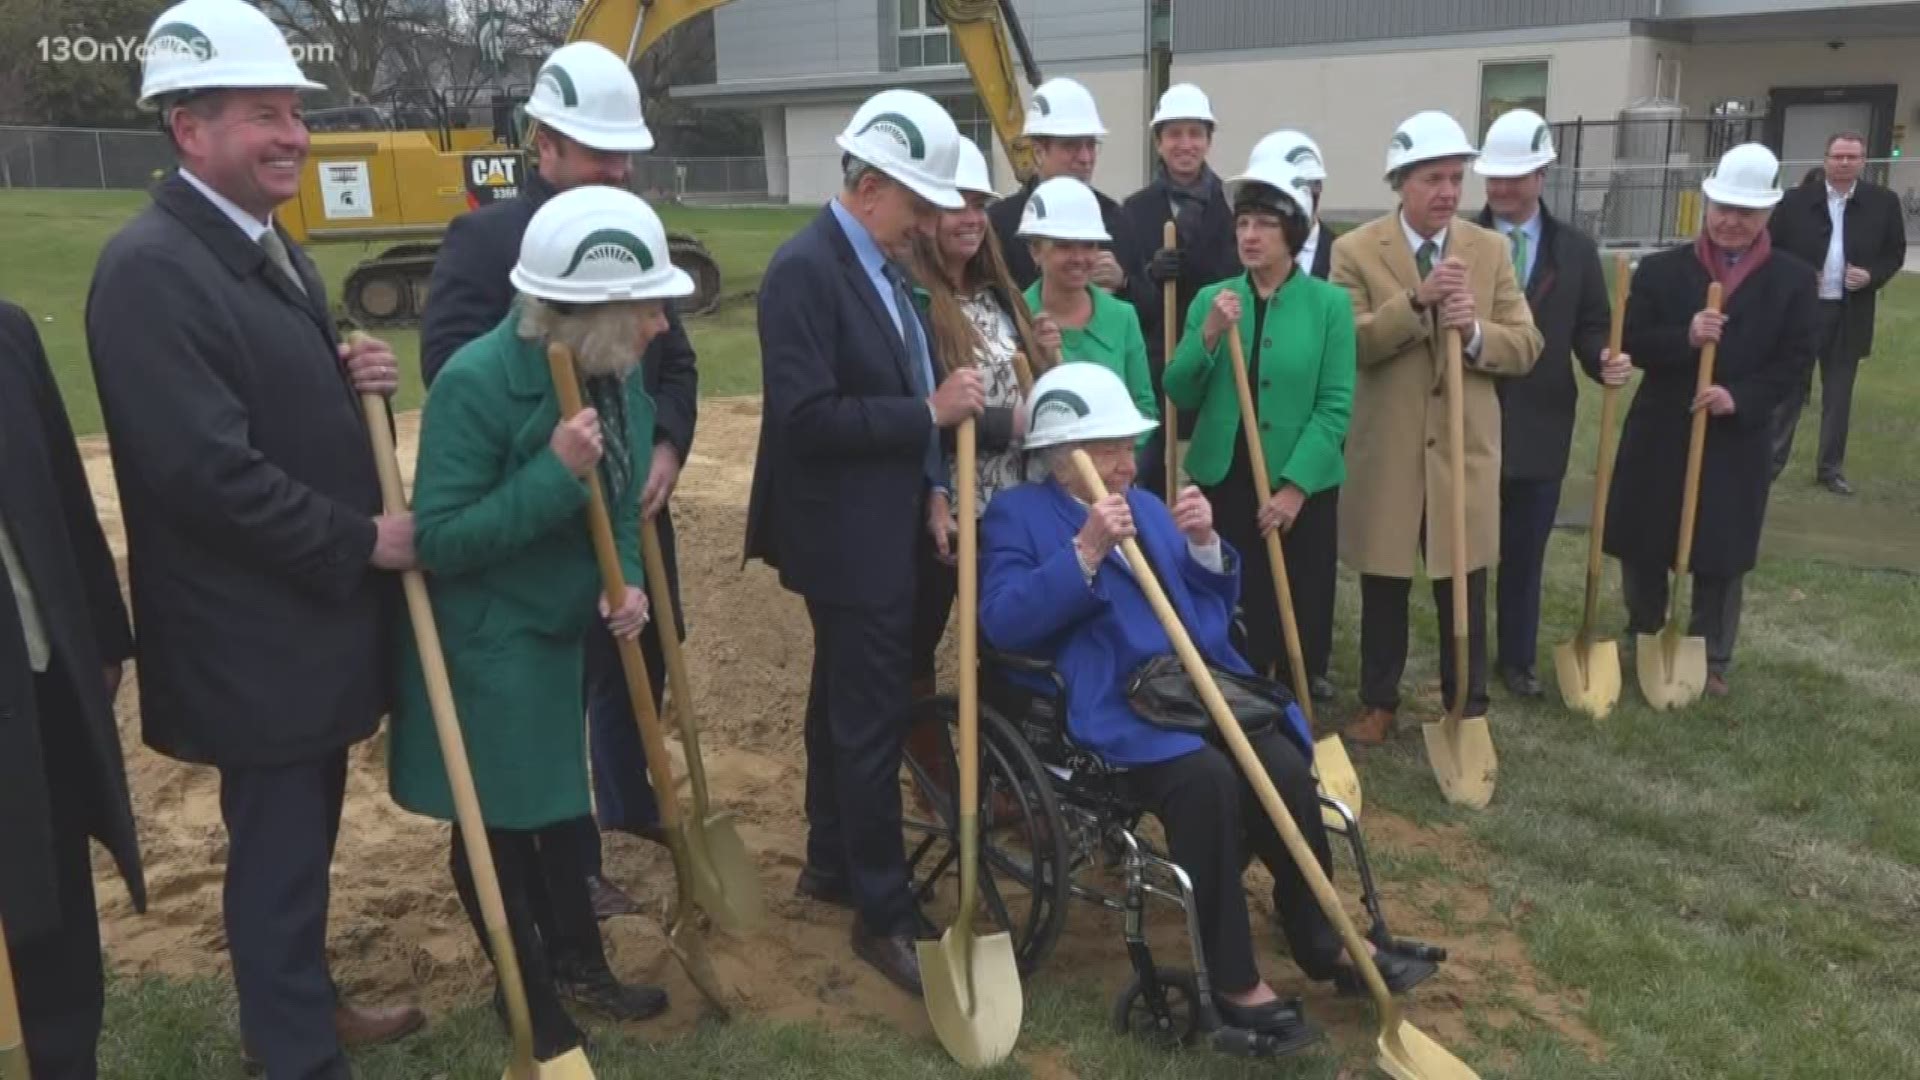 Schools Leaders broke ground today on The Doug Meijer Medical innovation building. It's located at the northeast corner of Michigan street and Monroe avenu